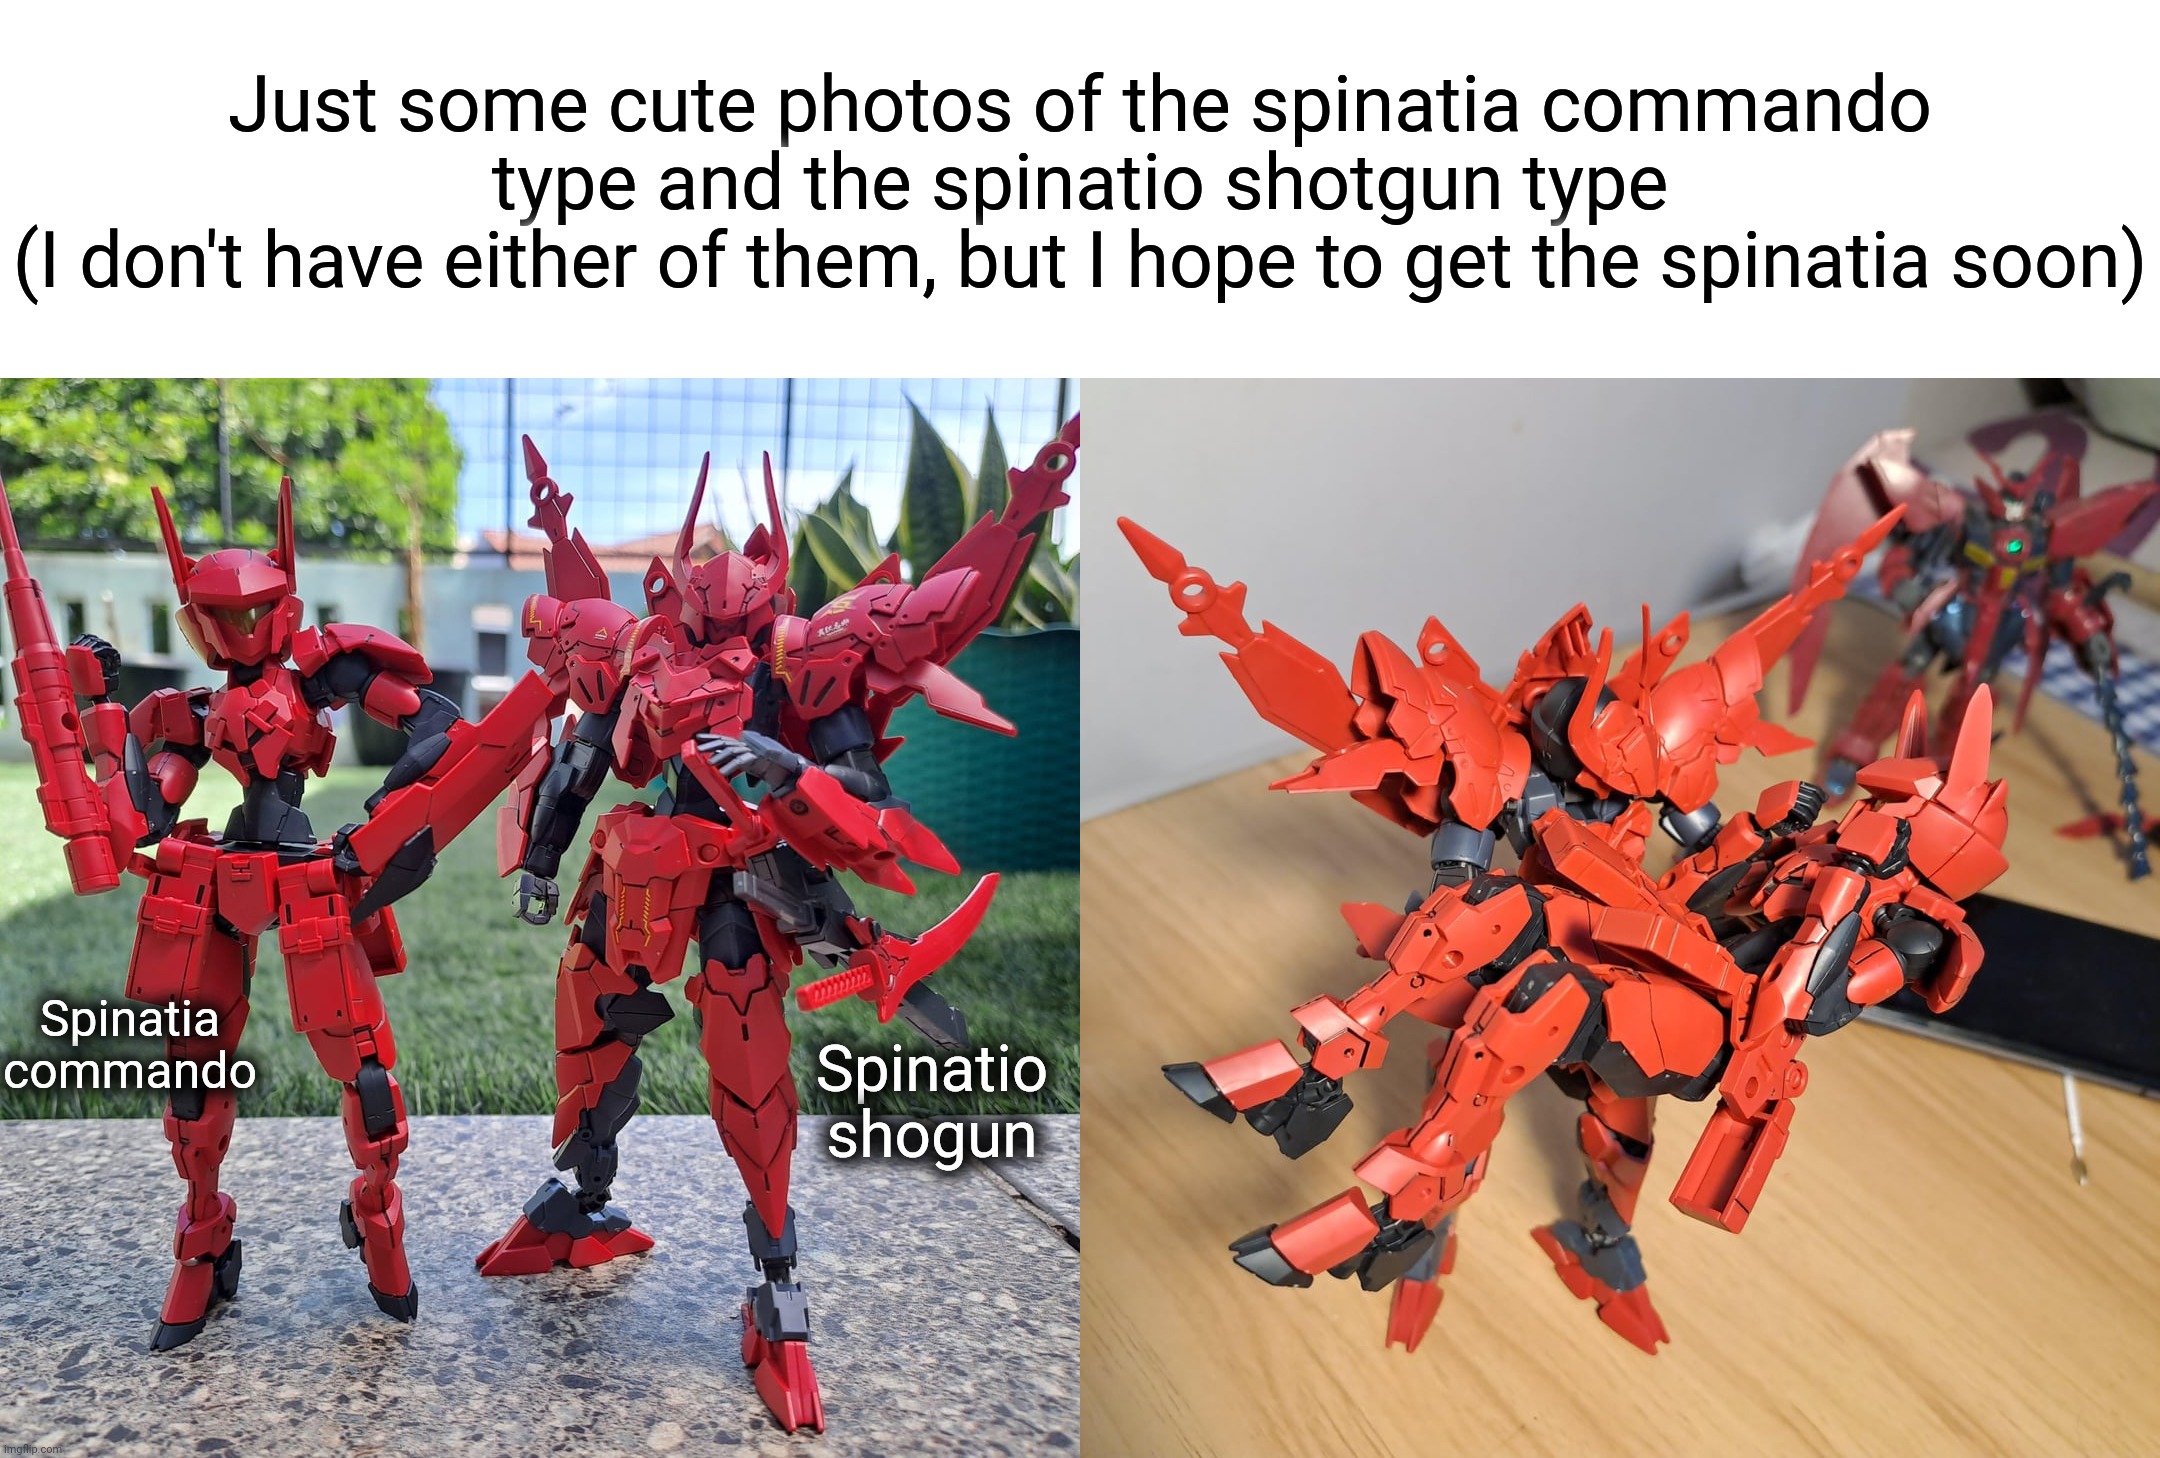 Too bad the spinatio shogun type is P-bandai | Just some cute photos of the spinatia commando type and the spinatio shotgun type
(I don't have either of them, but I hope to get the spinatia soon); Spinatia commando; Spinatio shogun | made w/ Imgflip meme maker